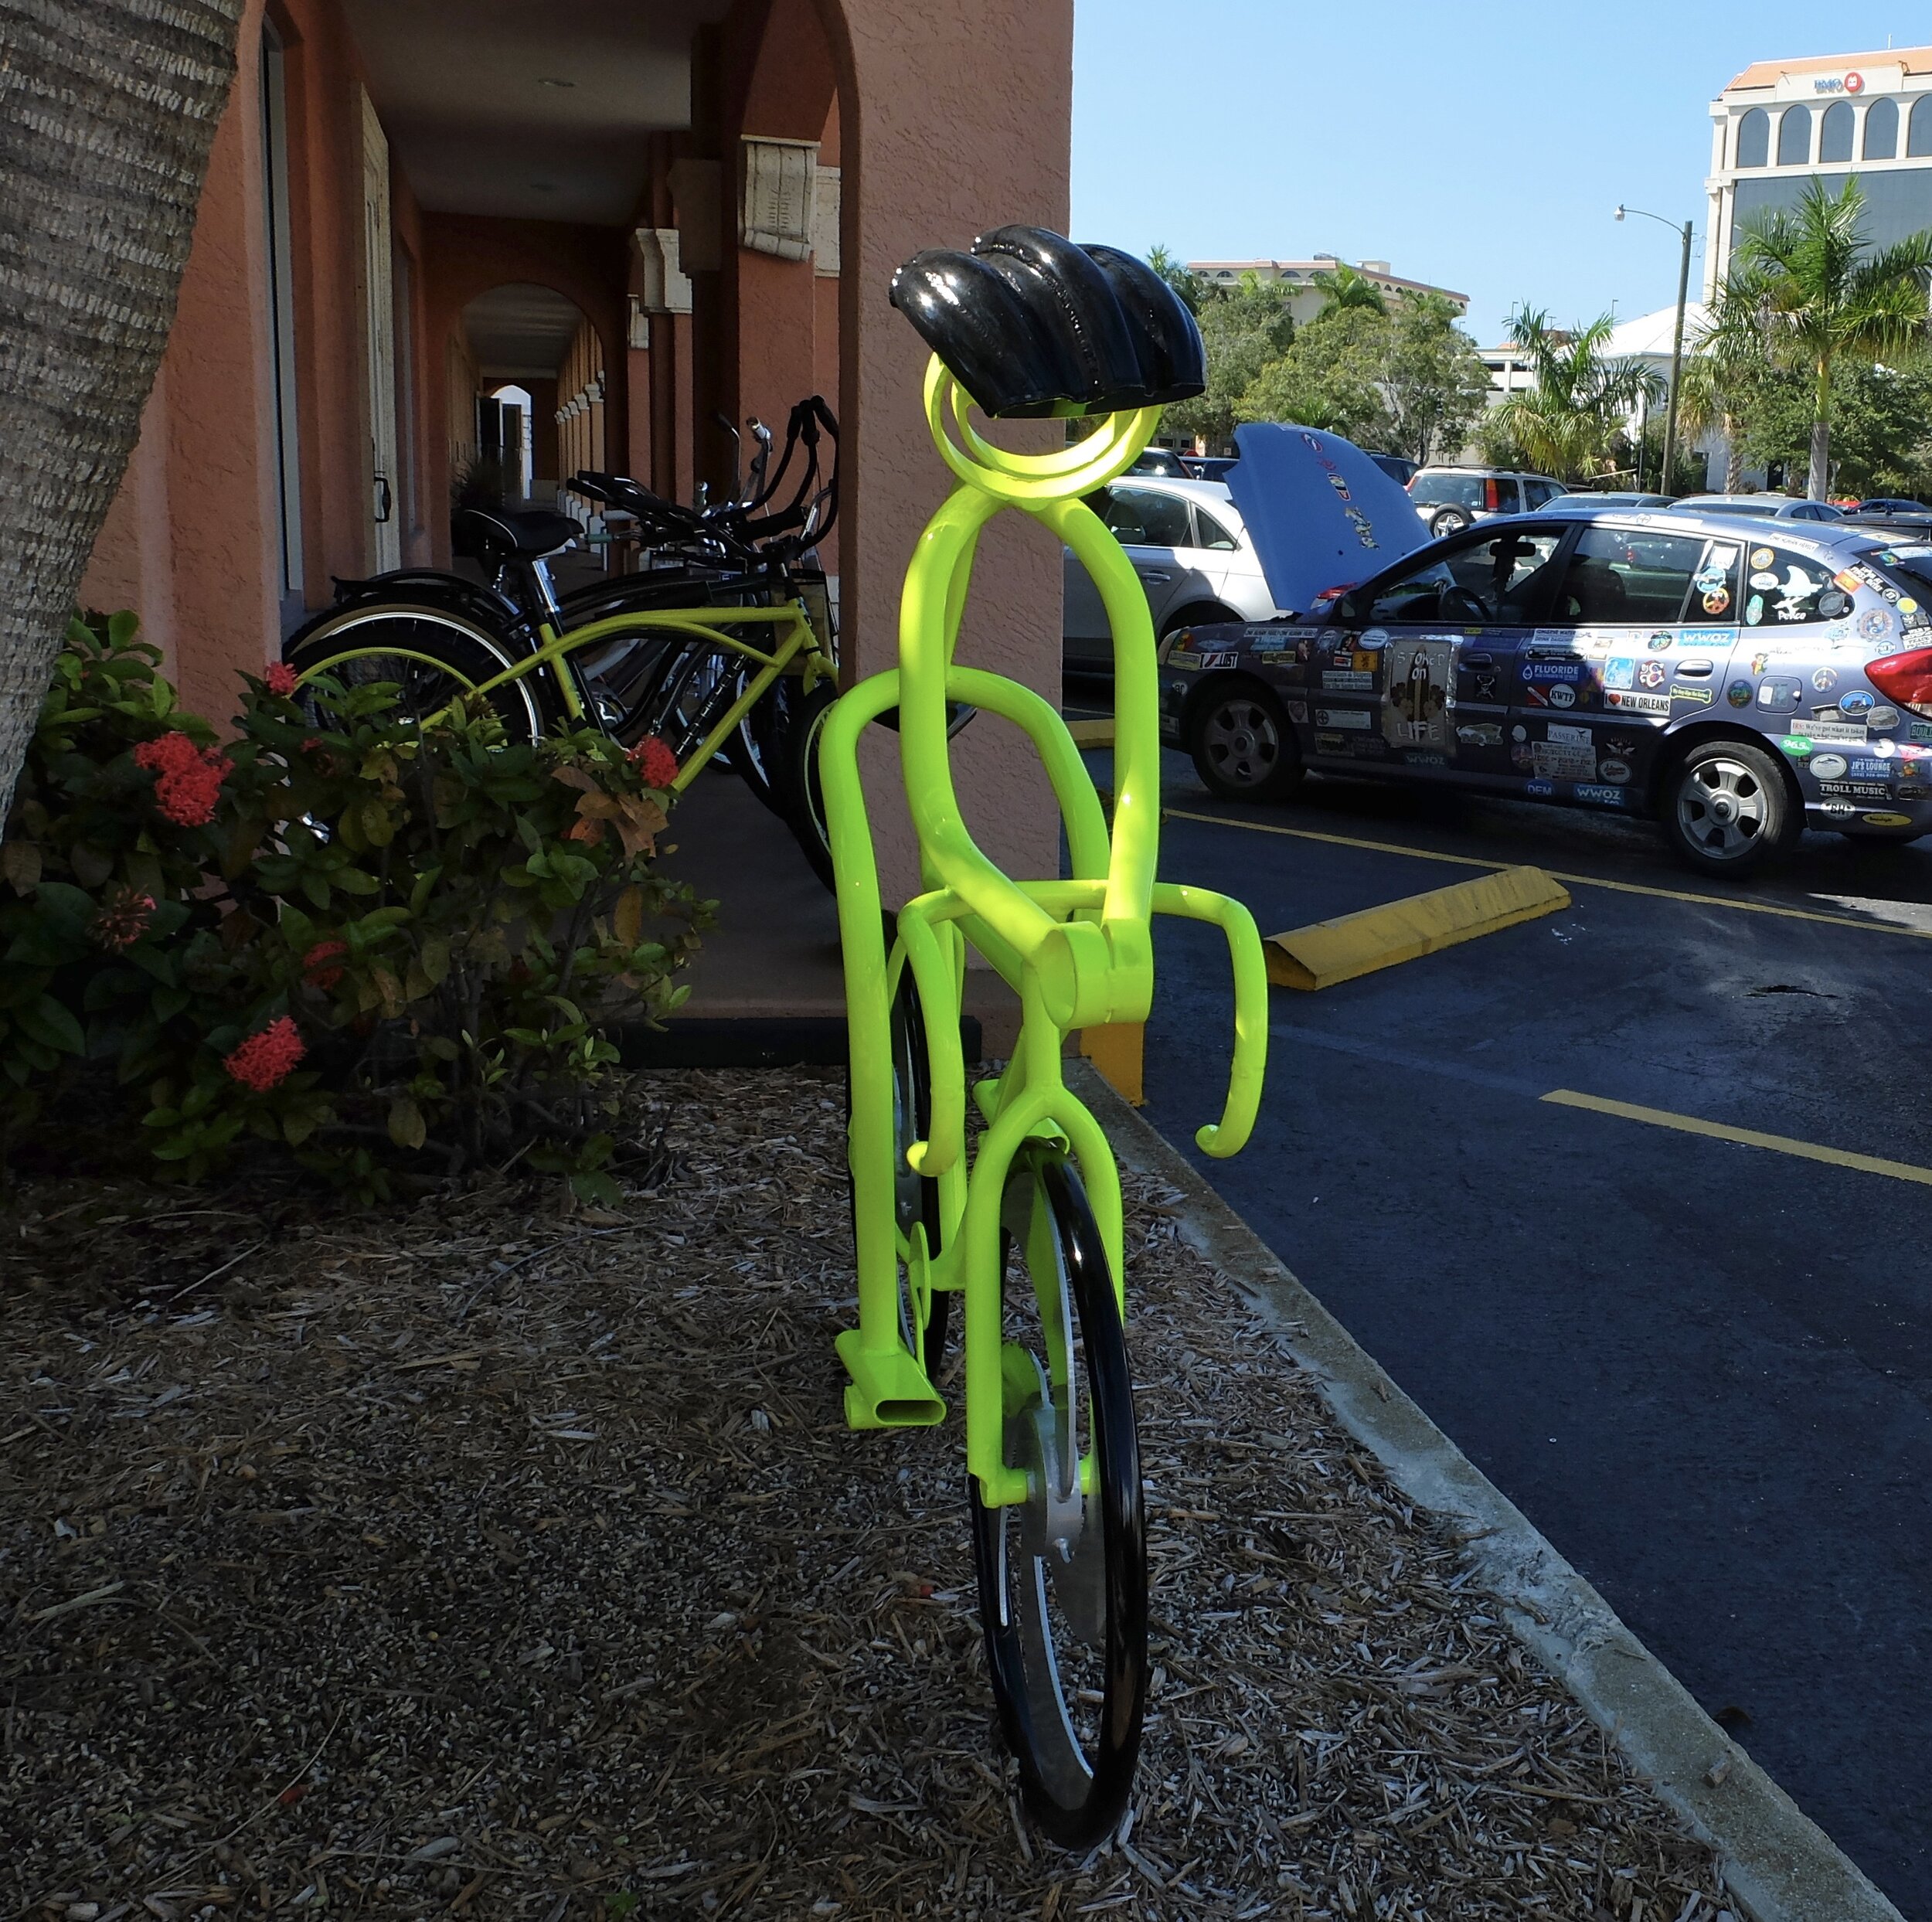 Renting a bike in Sarasota, FL when I was there for a conference.  I take any excuse to tour on a bicycle.  See David Byrne's book "Bicycle Diaries."